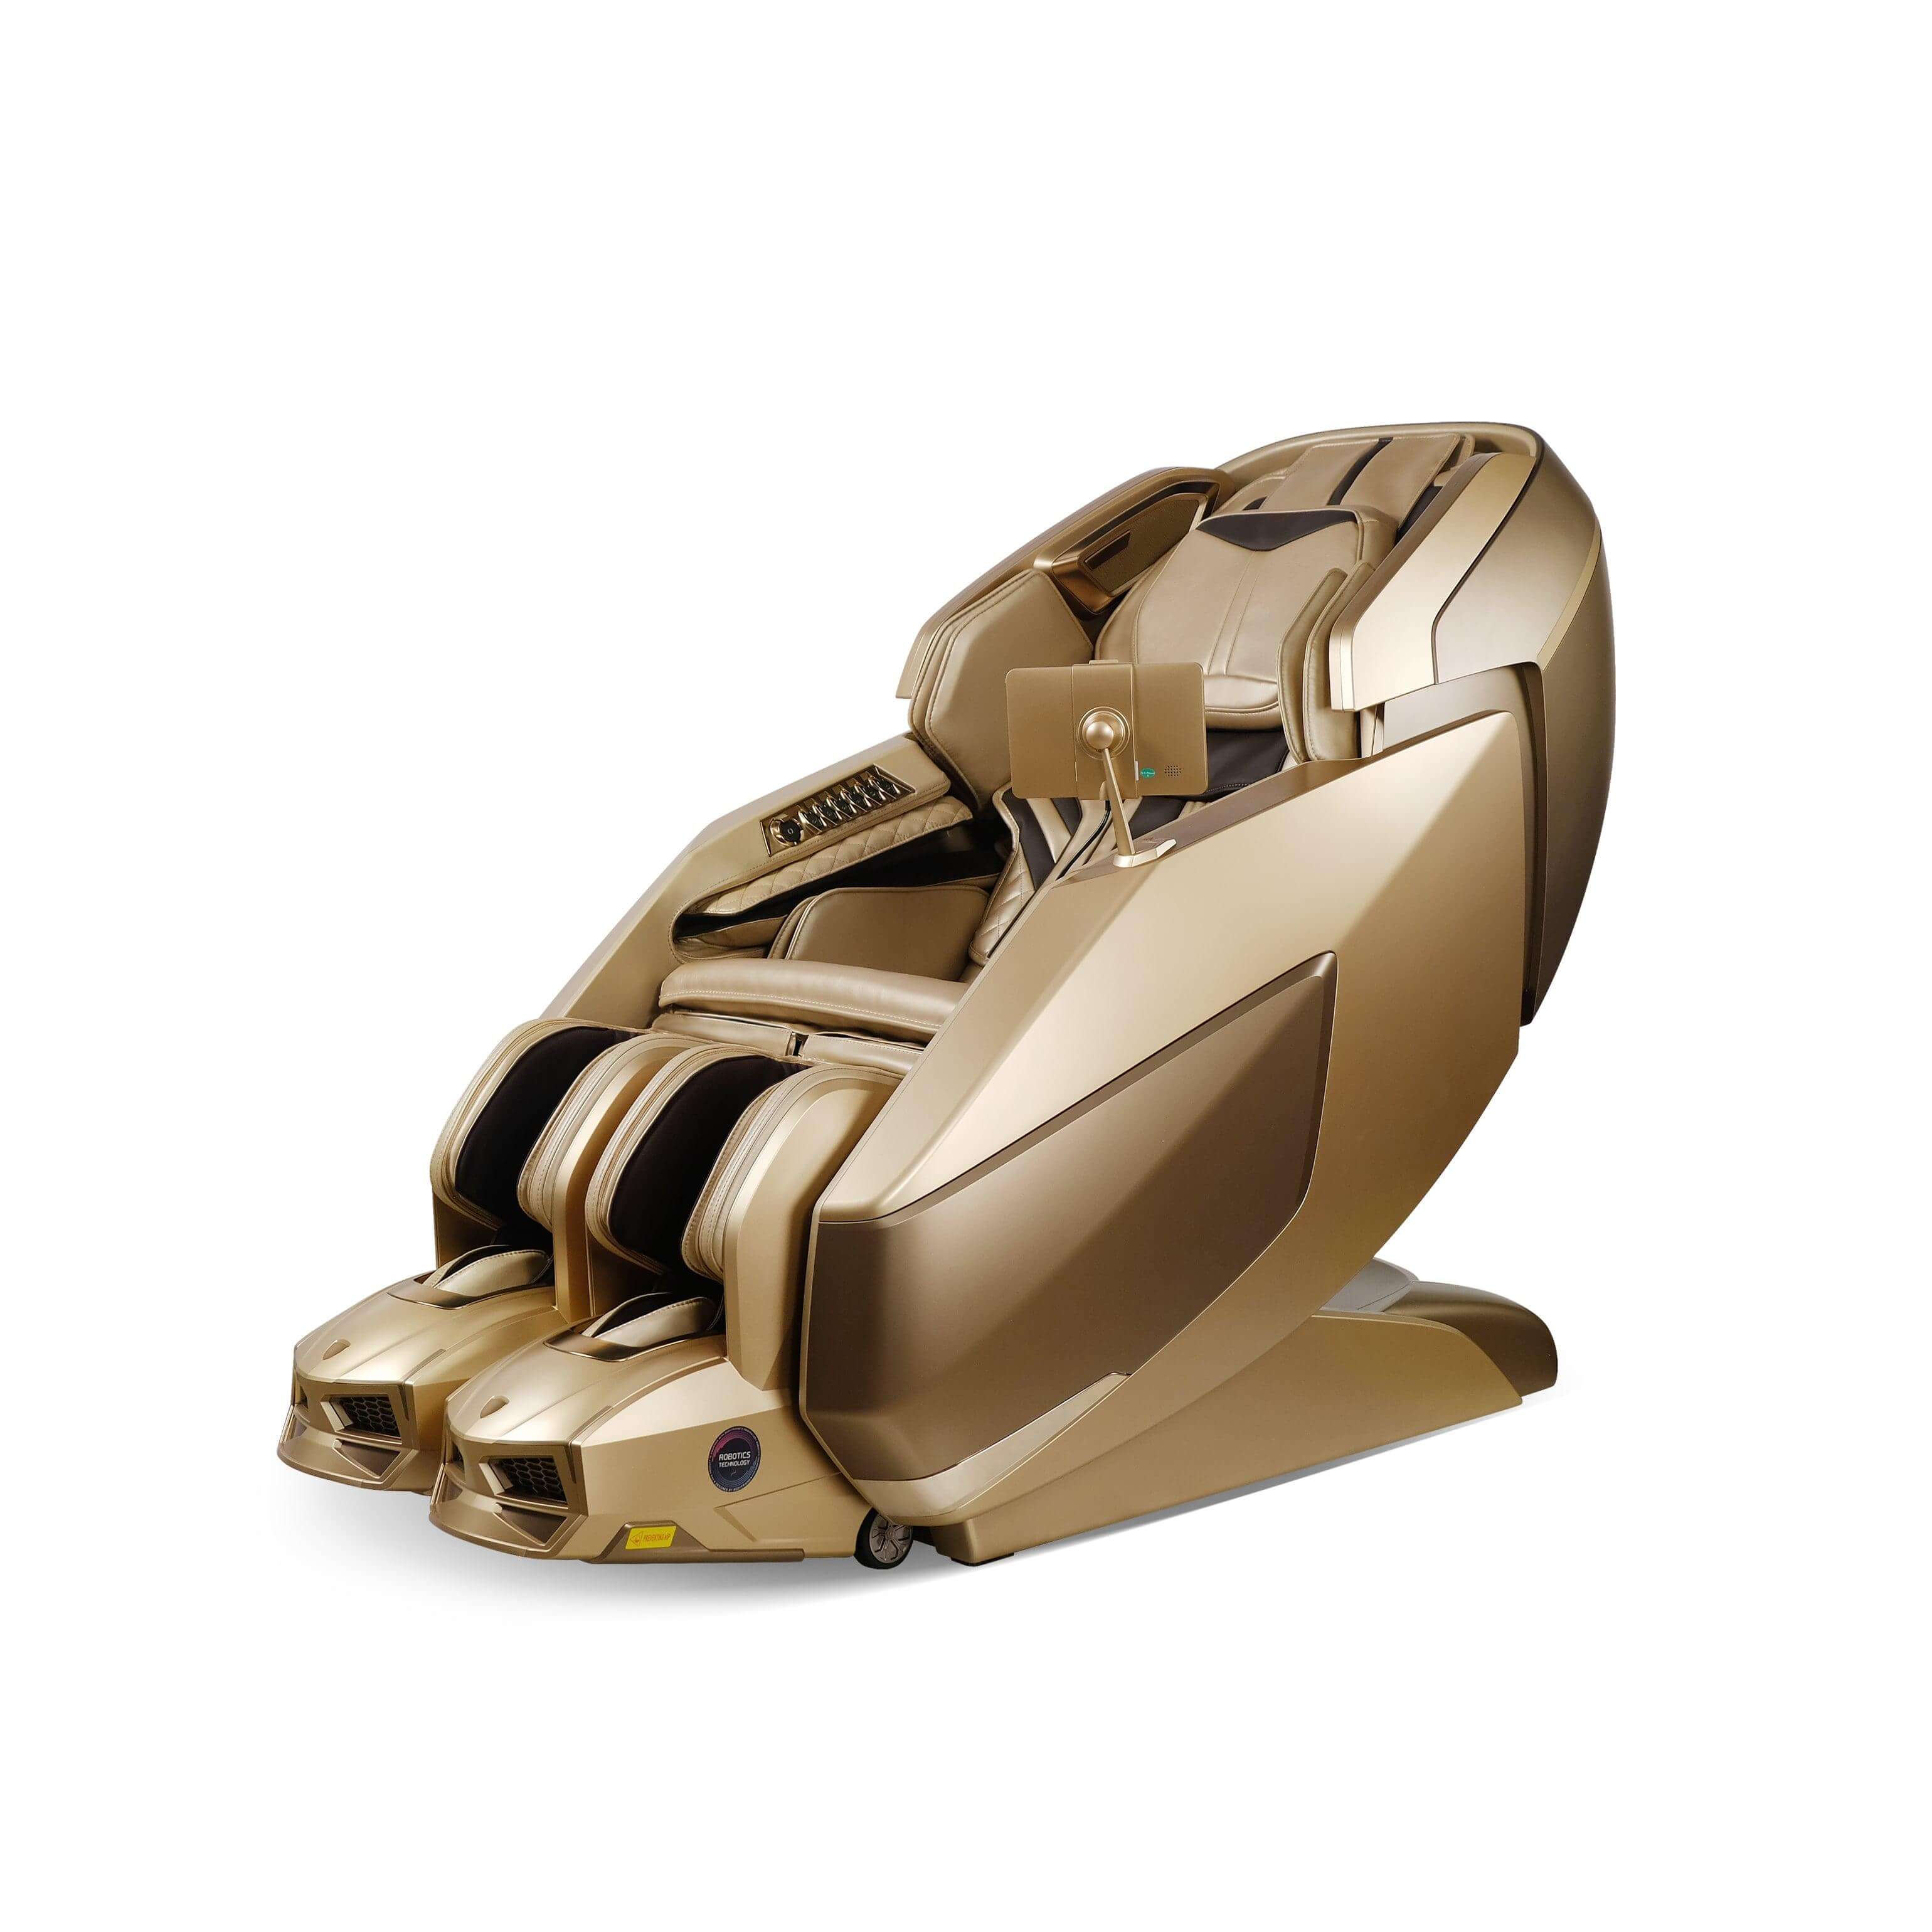 AI Robotic Massage Chair in Sleek Golden with Rovo Walking Technology and full-body airbags - Best massage chair UAE, Dubai, best massage chair uae, massage chair Dubai, massage chair uae, massage chair Saudi Arabia, كرسي التدليك, Best massage chair in Du